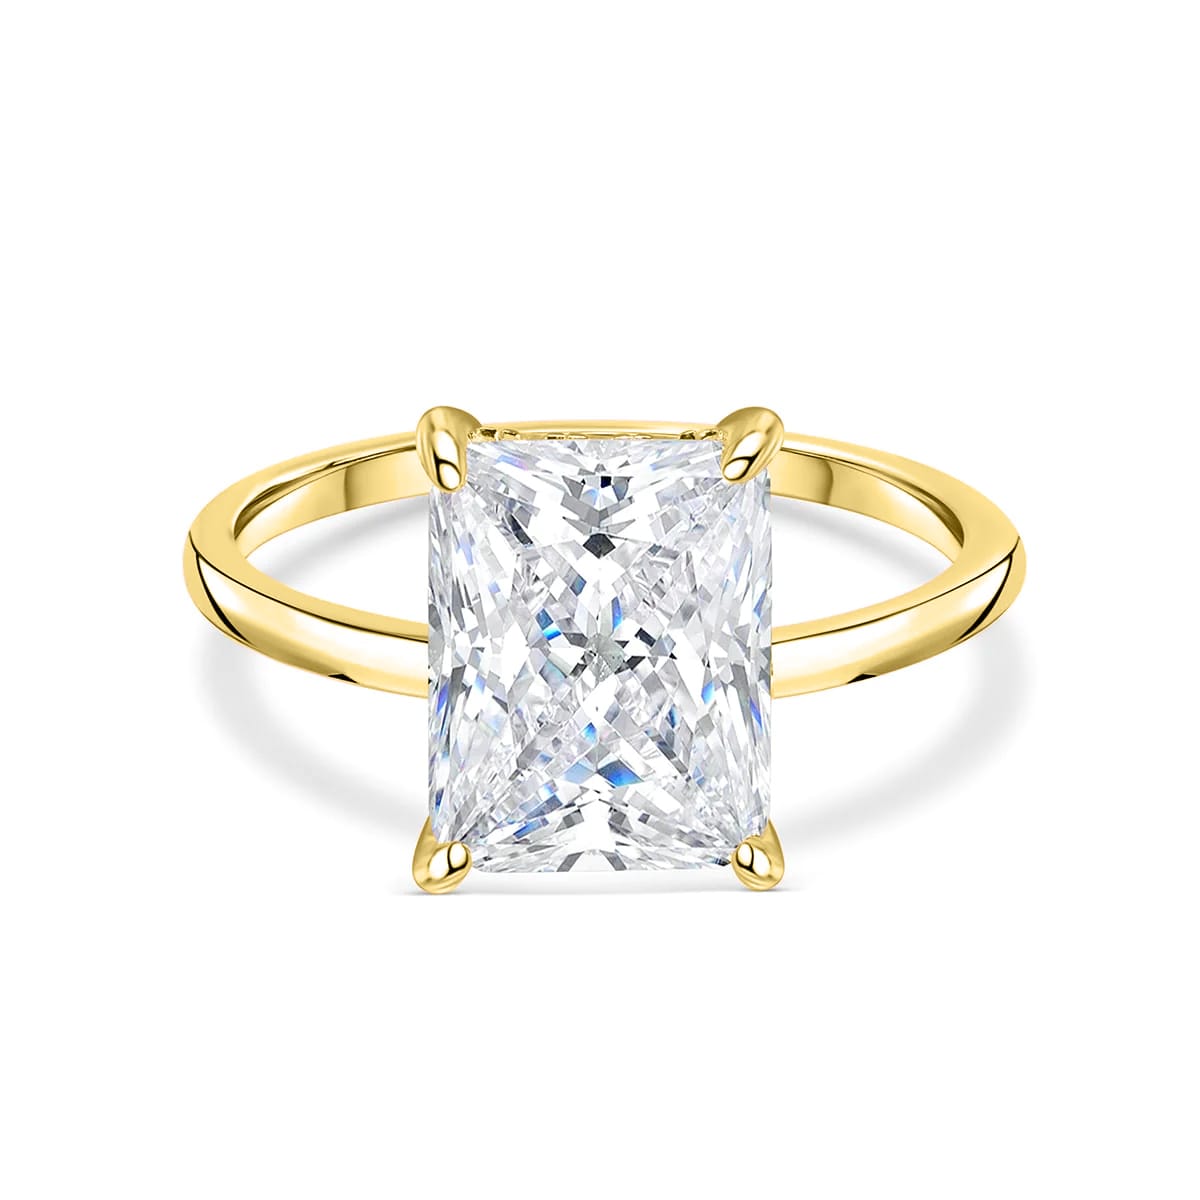 Yellow gold radiant cut engagement ring.